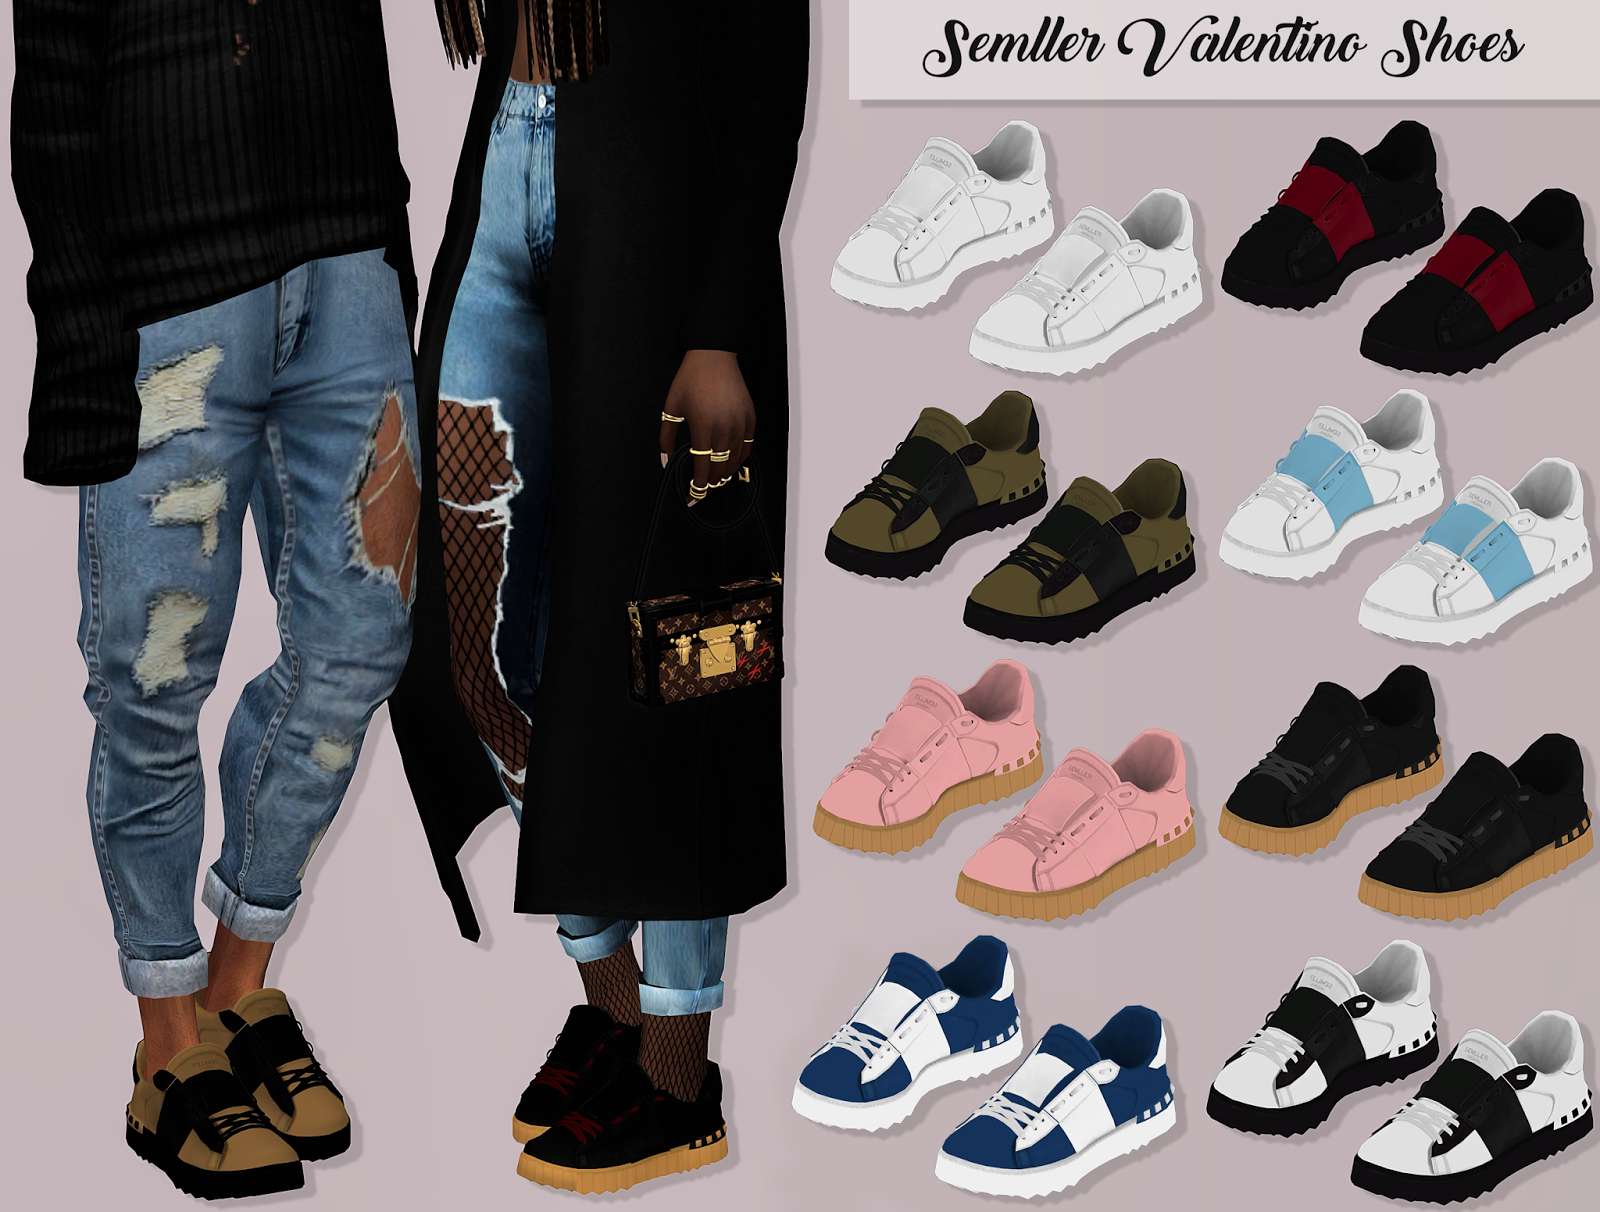 Sims 4 CC's - The Best: Shoes by Lumy Sims